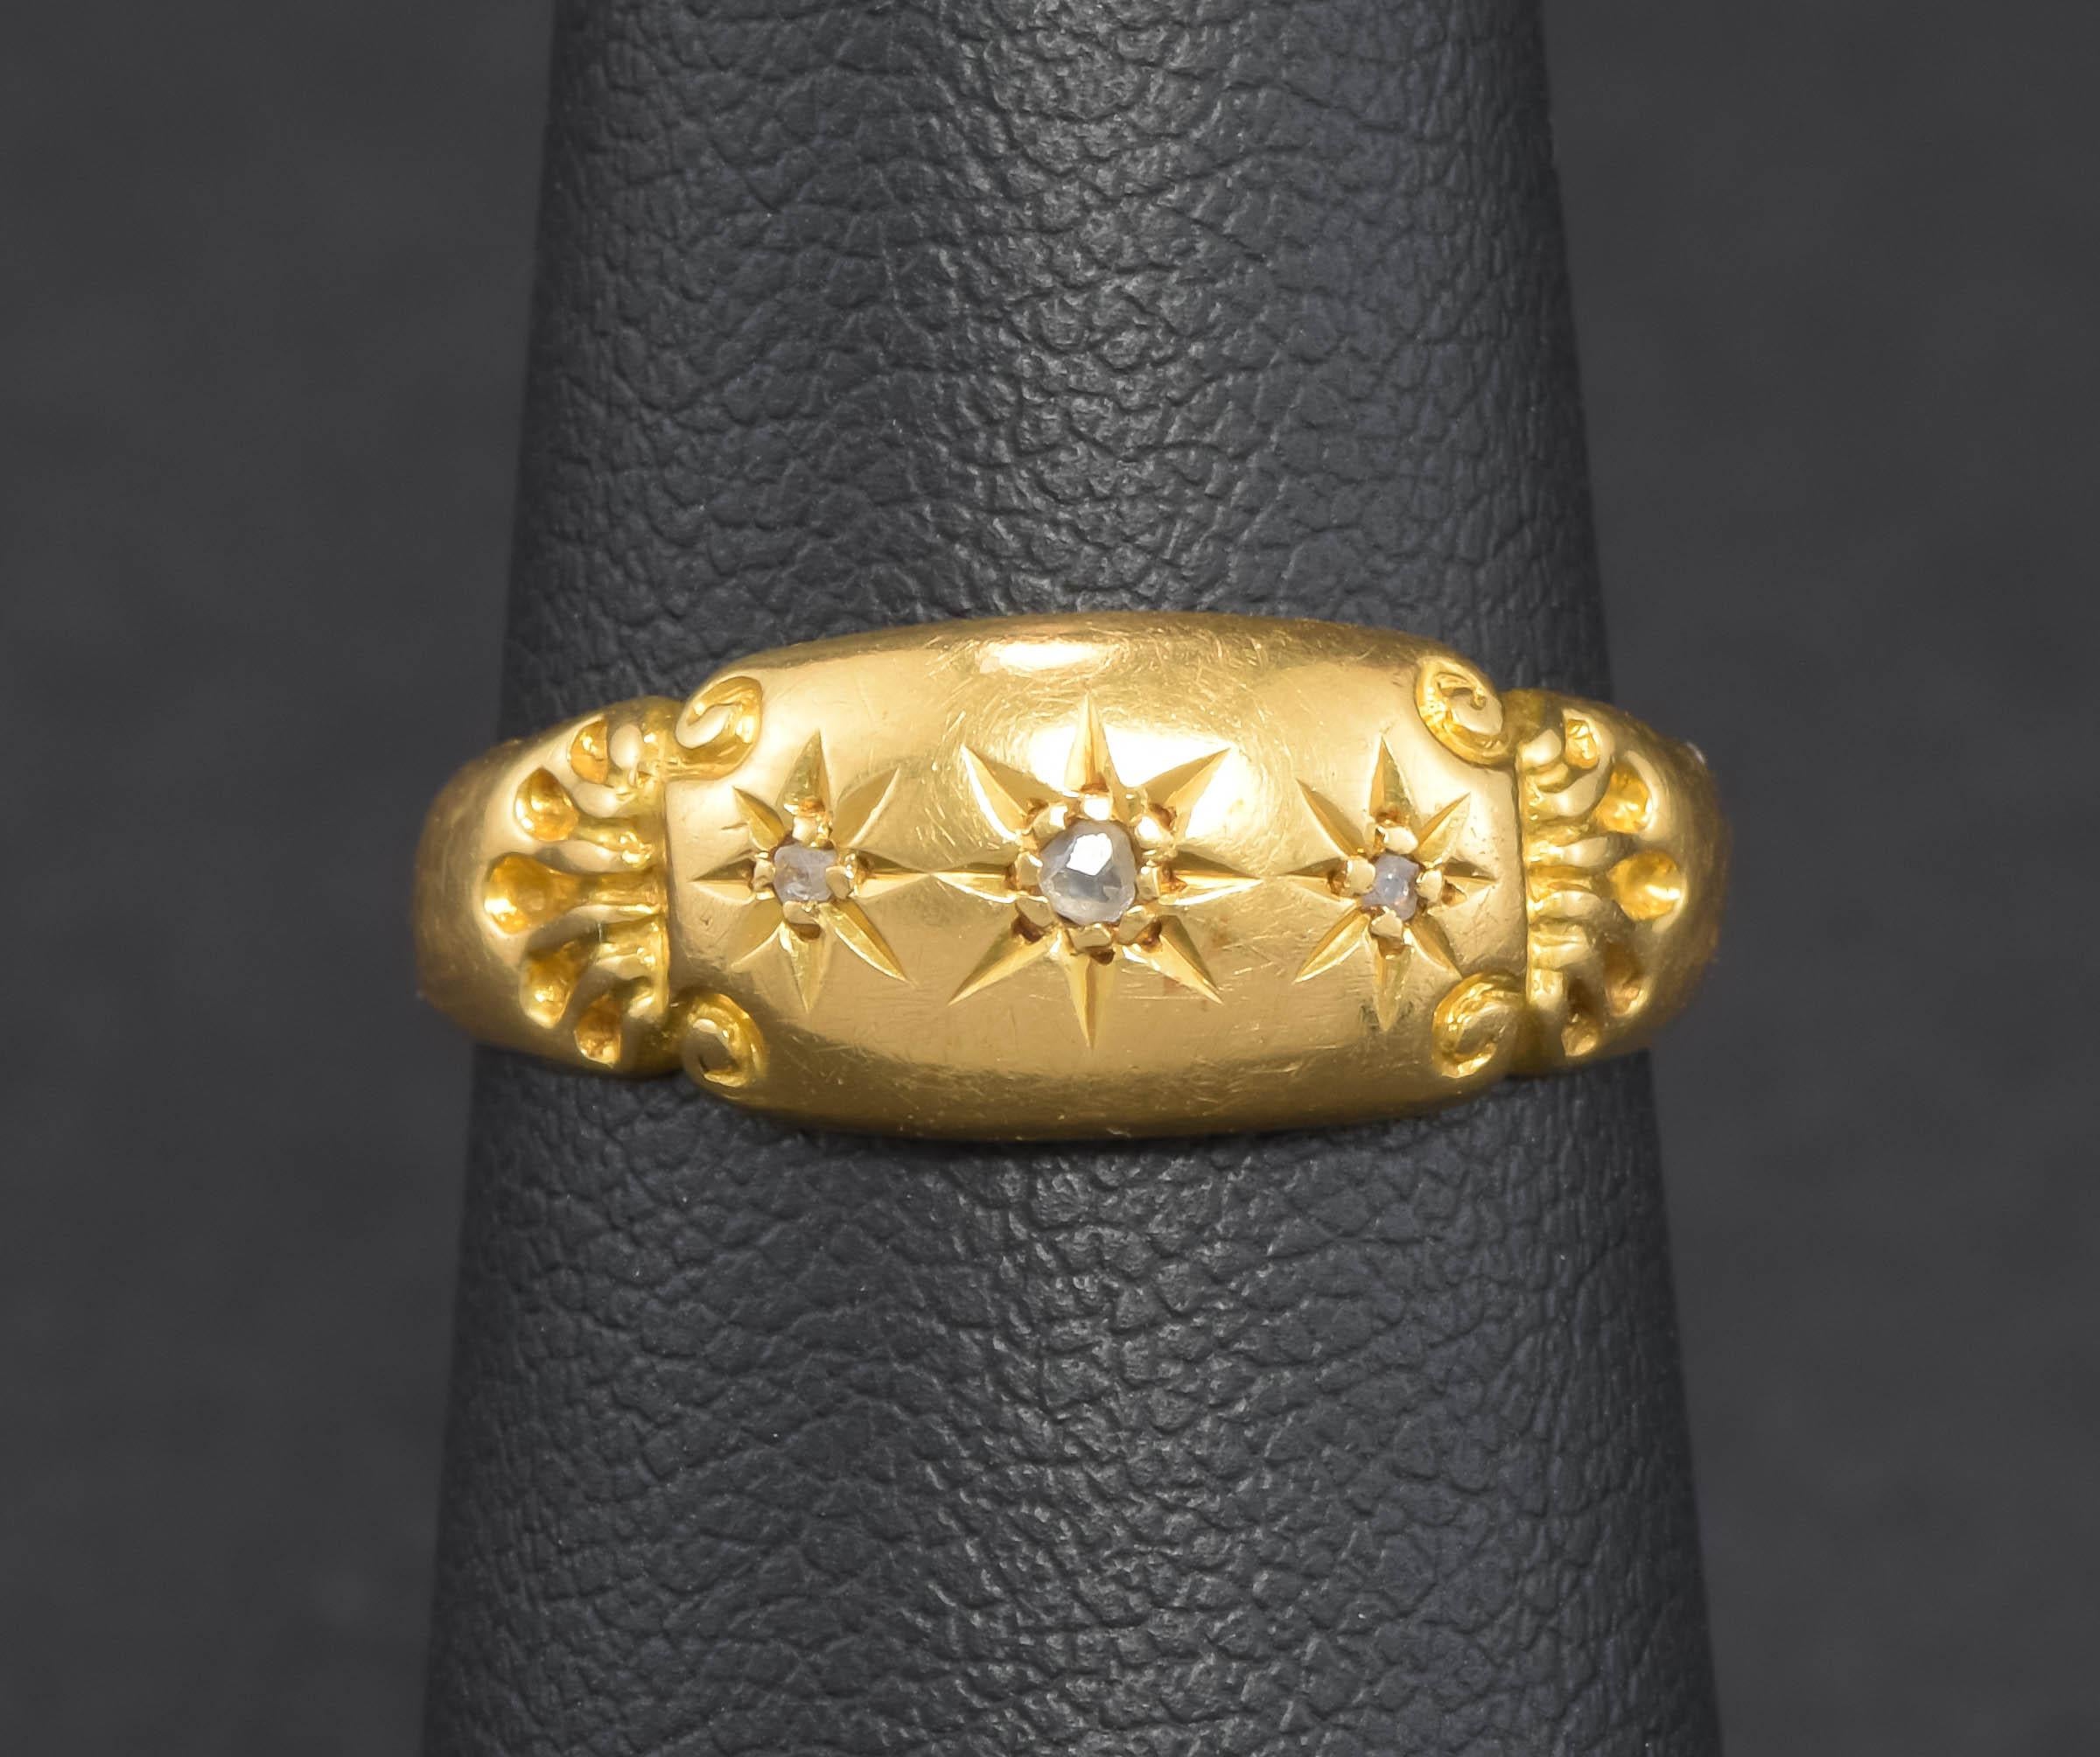 Offered is a charming Edwardian period English high karat gold diamond ring with full Chester hallmarks for 1910 - 1911.

Made of a lovely, richly hued buttery 18K gold, the band is a signet meets gypsy style ring, with three twinkly rose cut